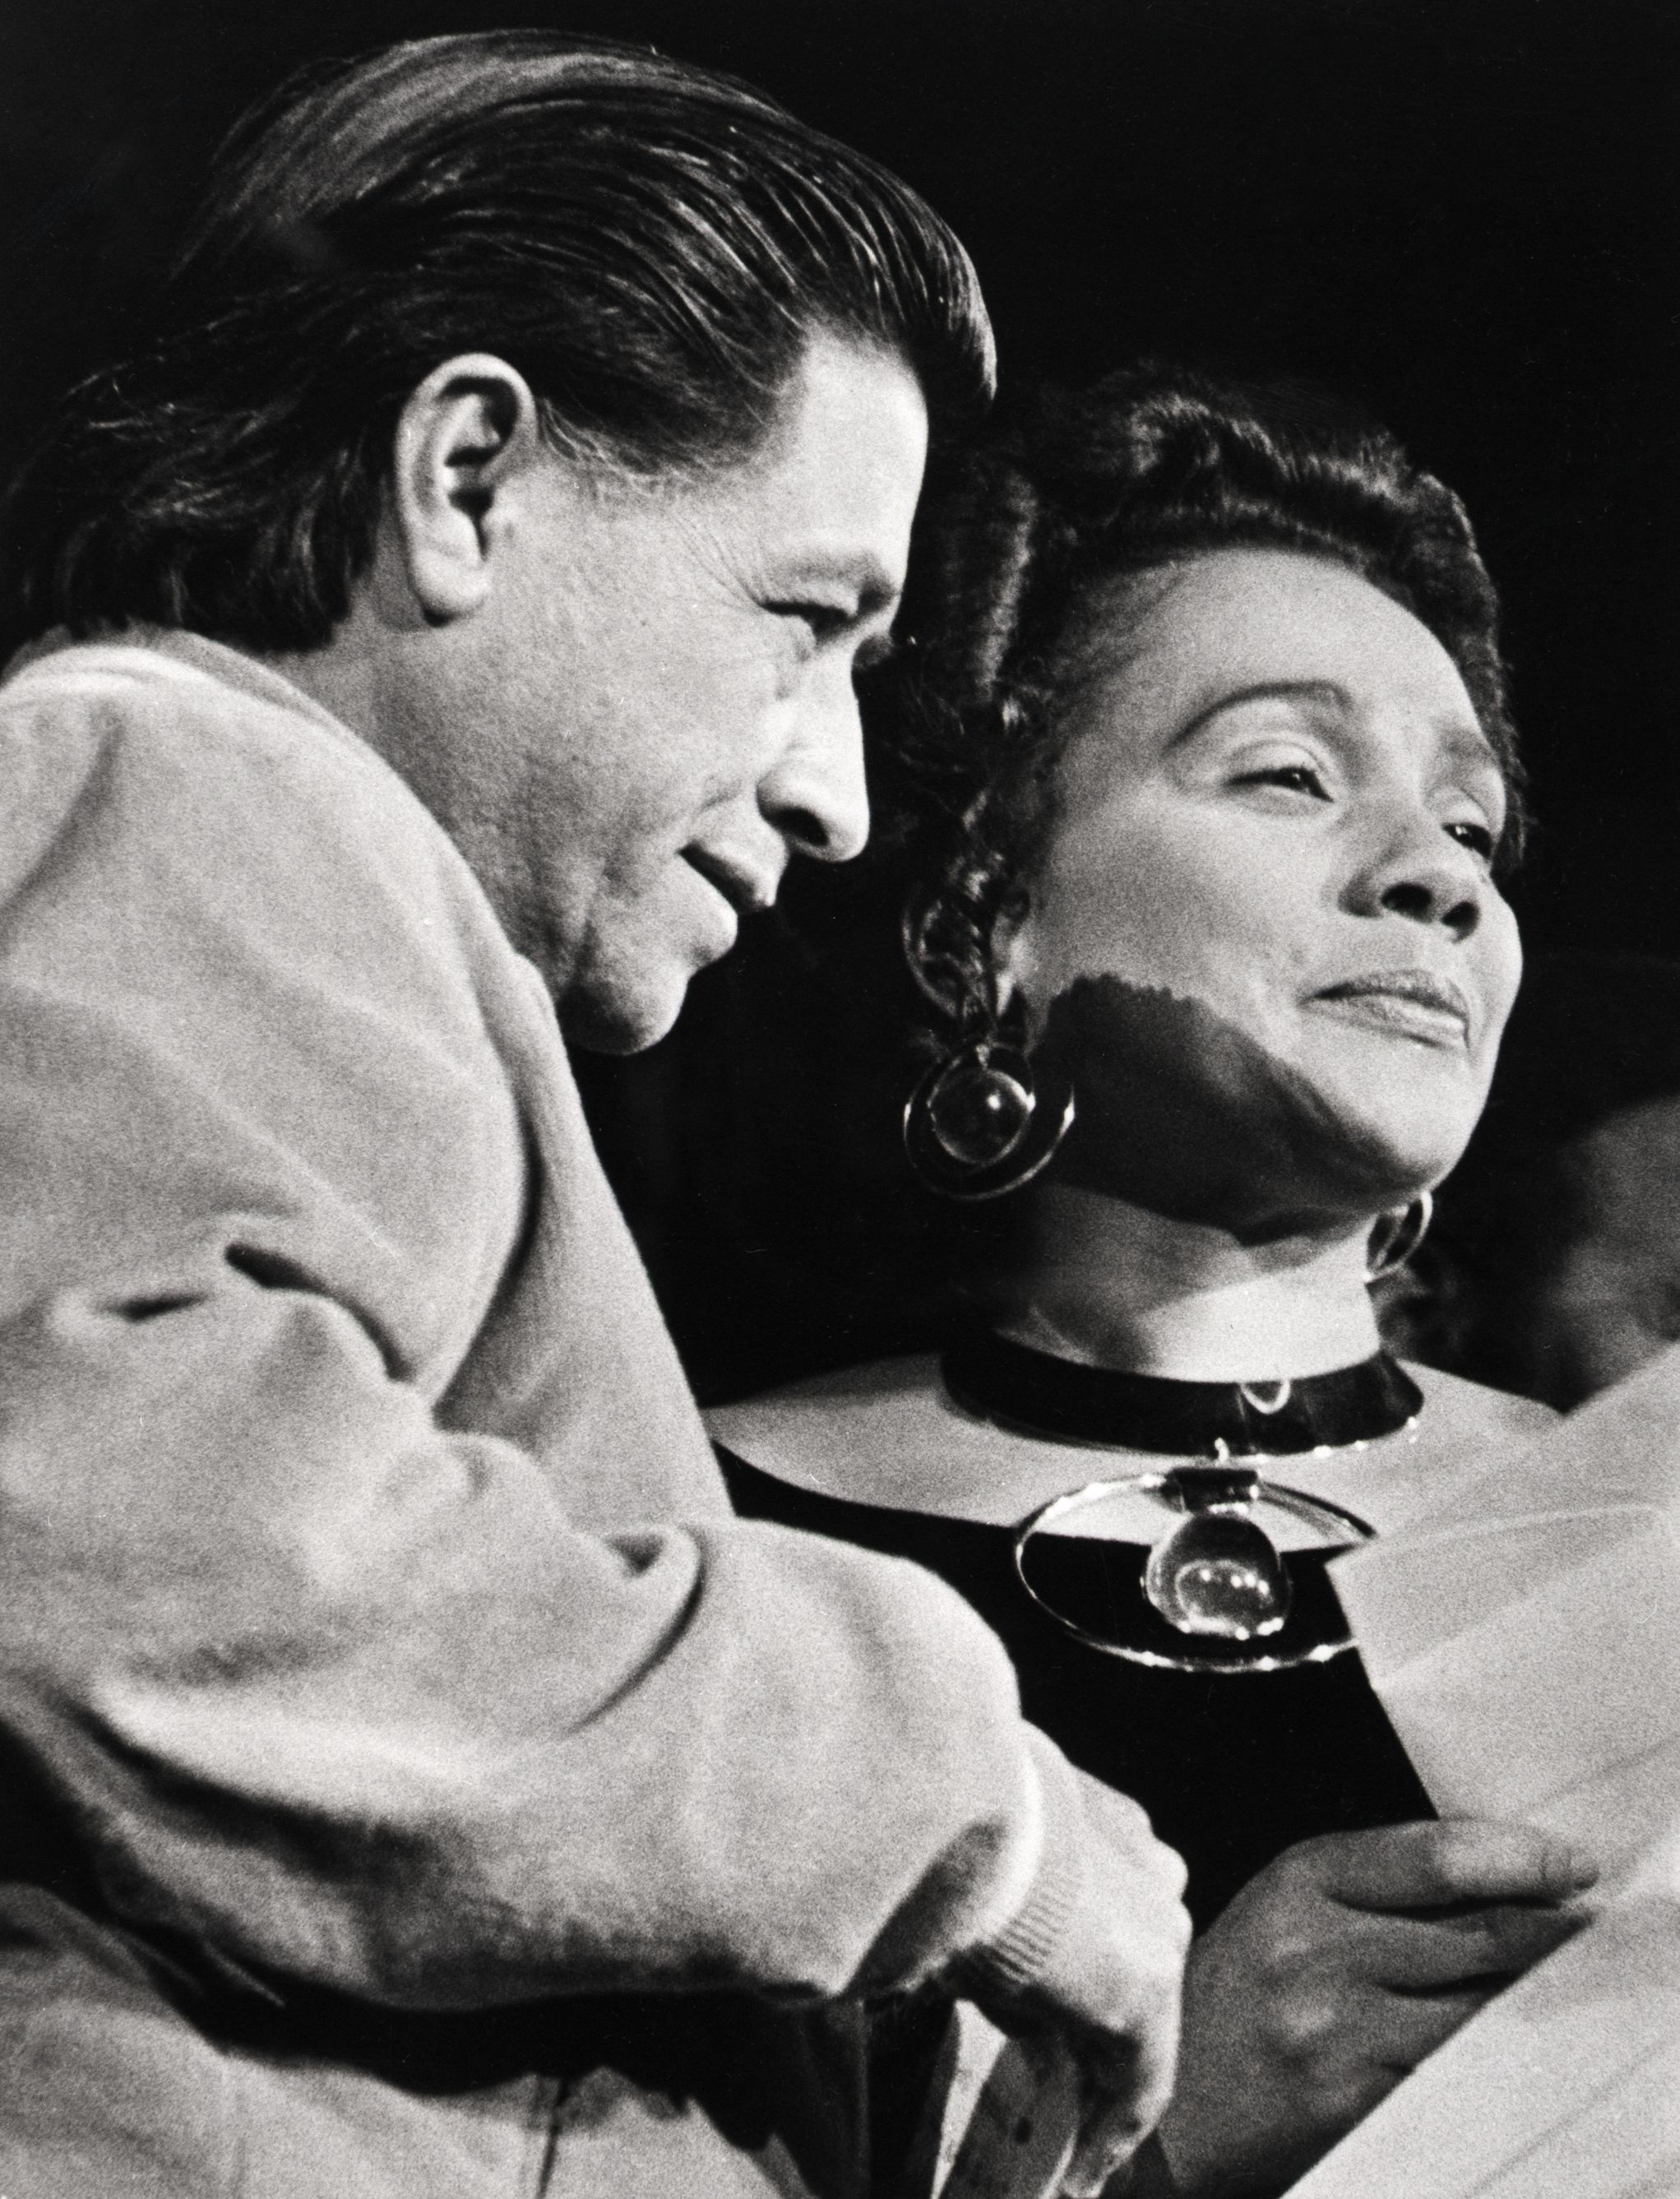 Cesar Chavez, United Farm Workers official, was given the Martin Luther King nonviolent peace award at a rally in Atlanta. Mrs. Coretta Scott King, widow of the late Dr. King made the presentation. The affair opened the two-day celebration of King's birthday.